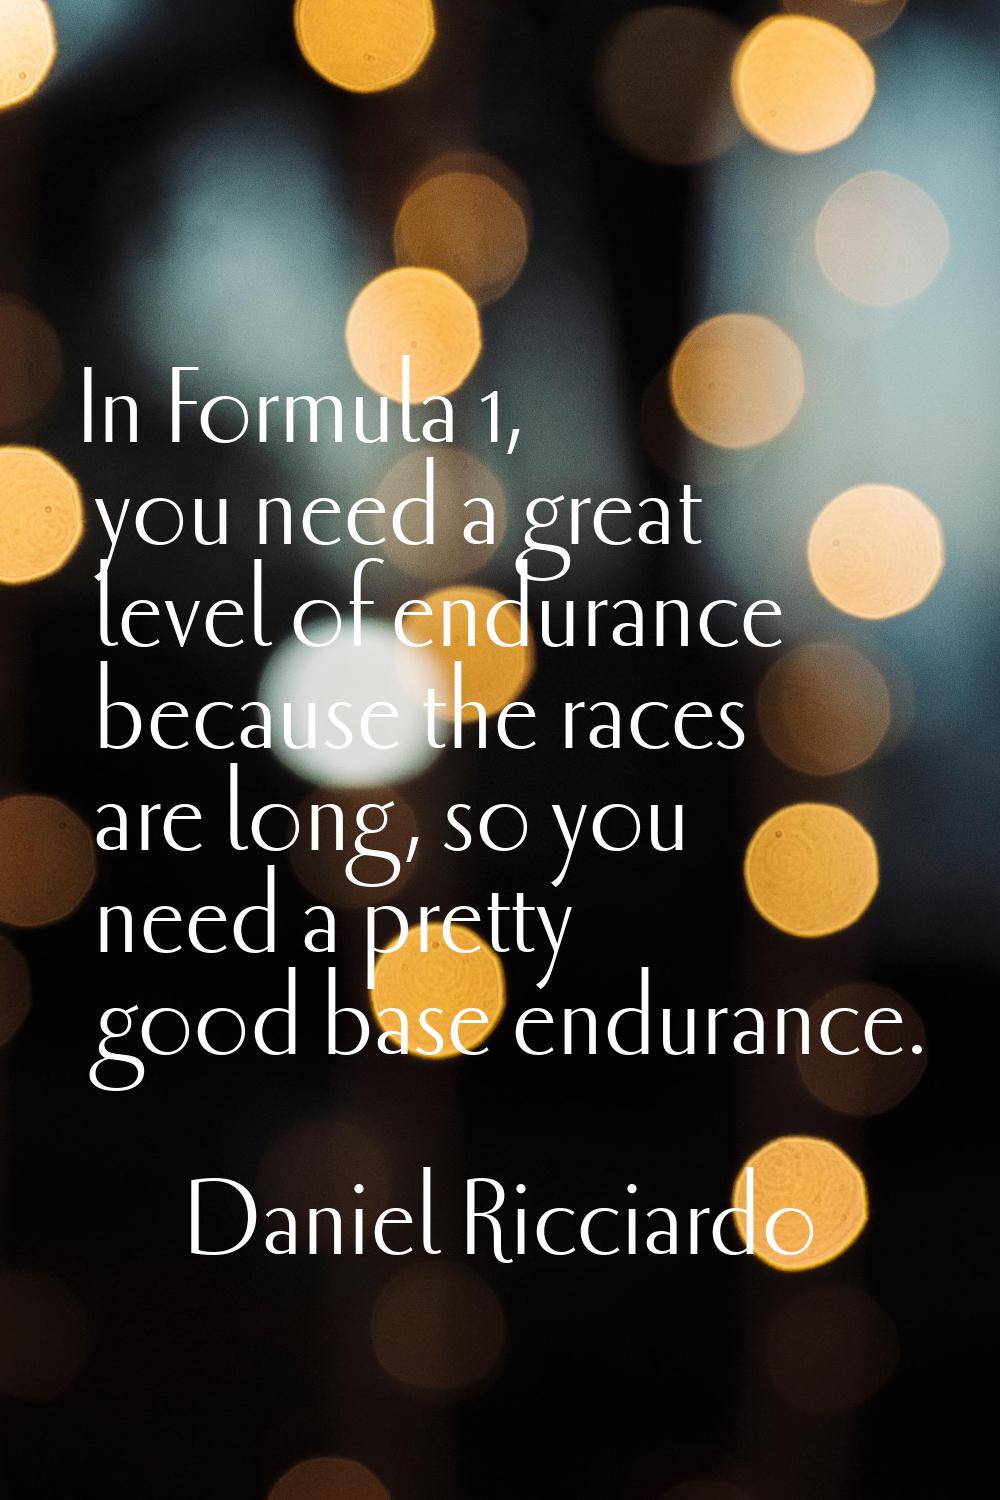 In Formula 1, you need a great level of endurance because the races are long, so you need a pretty 